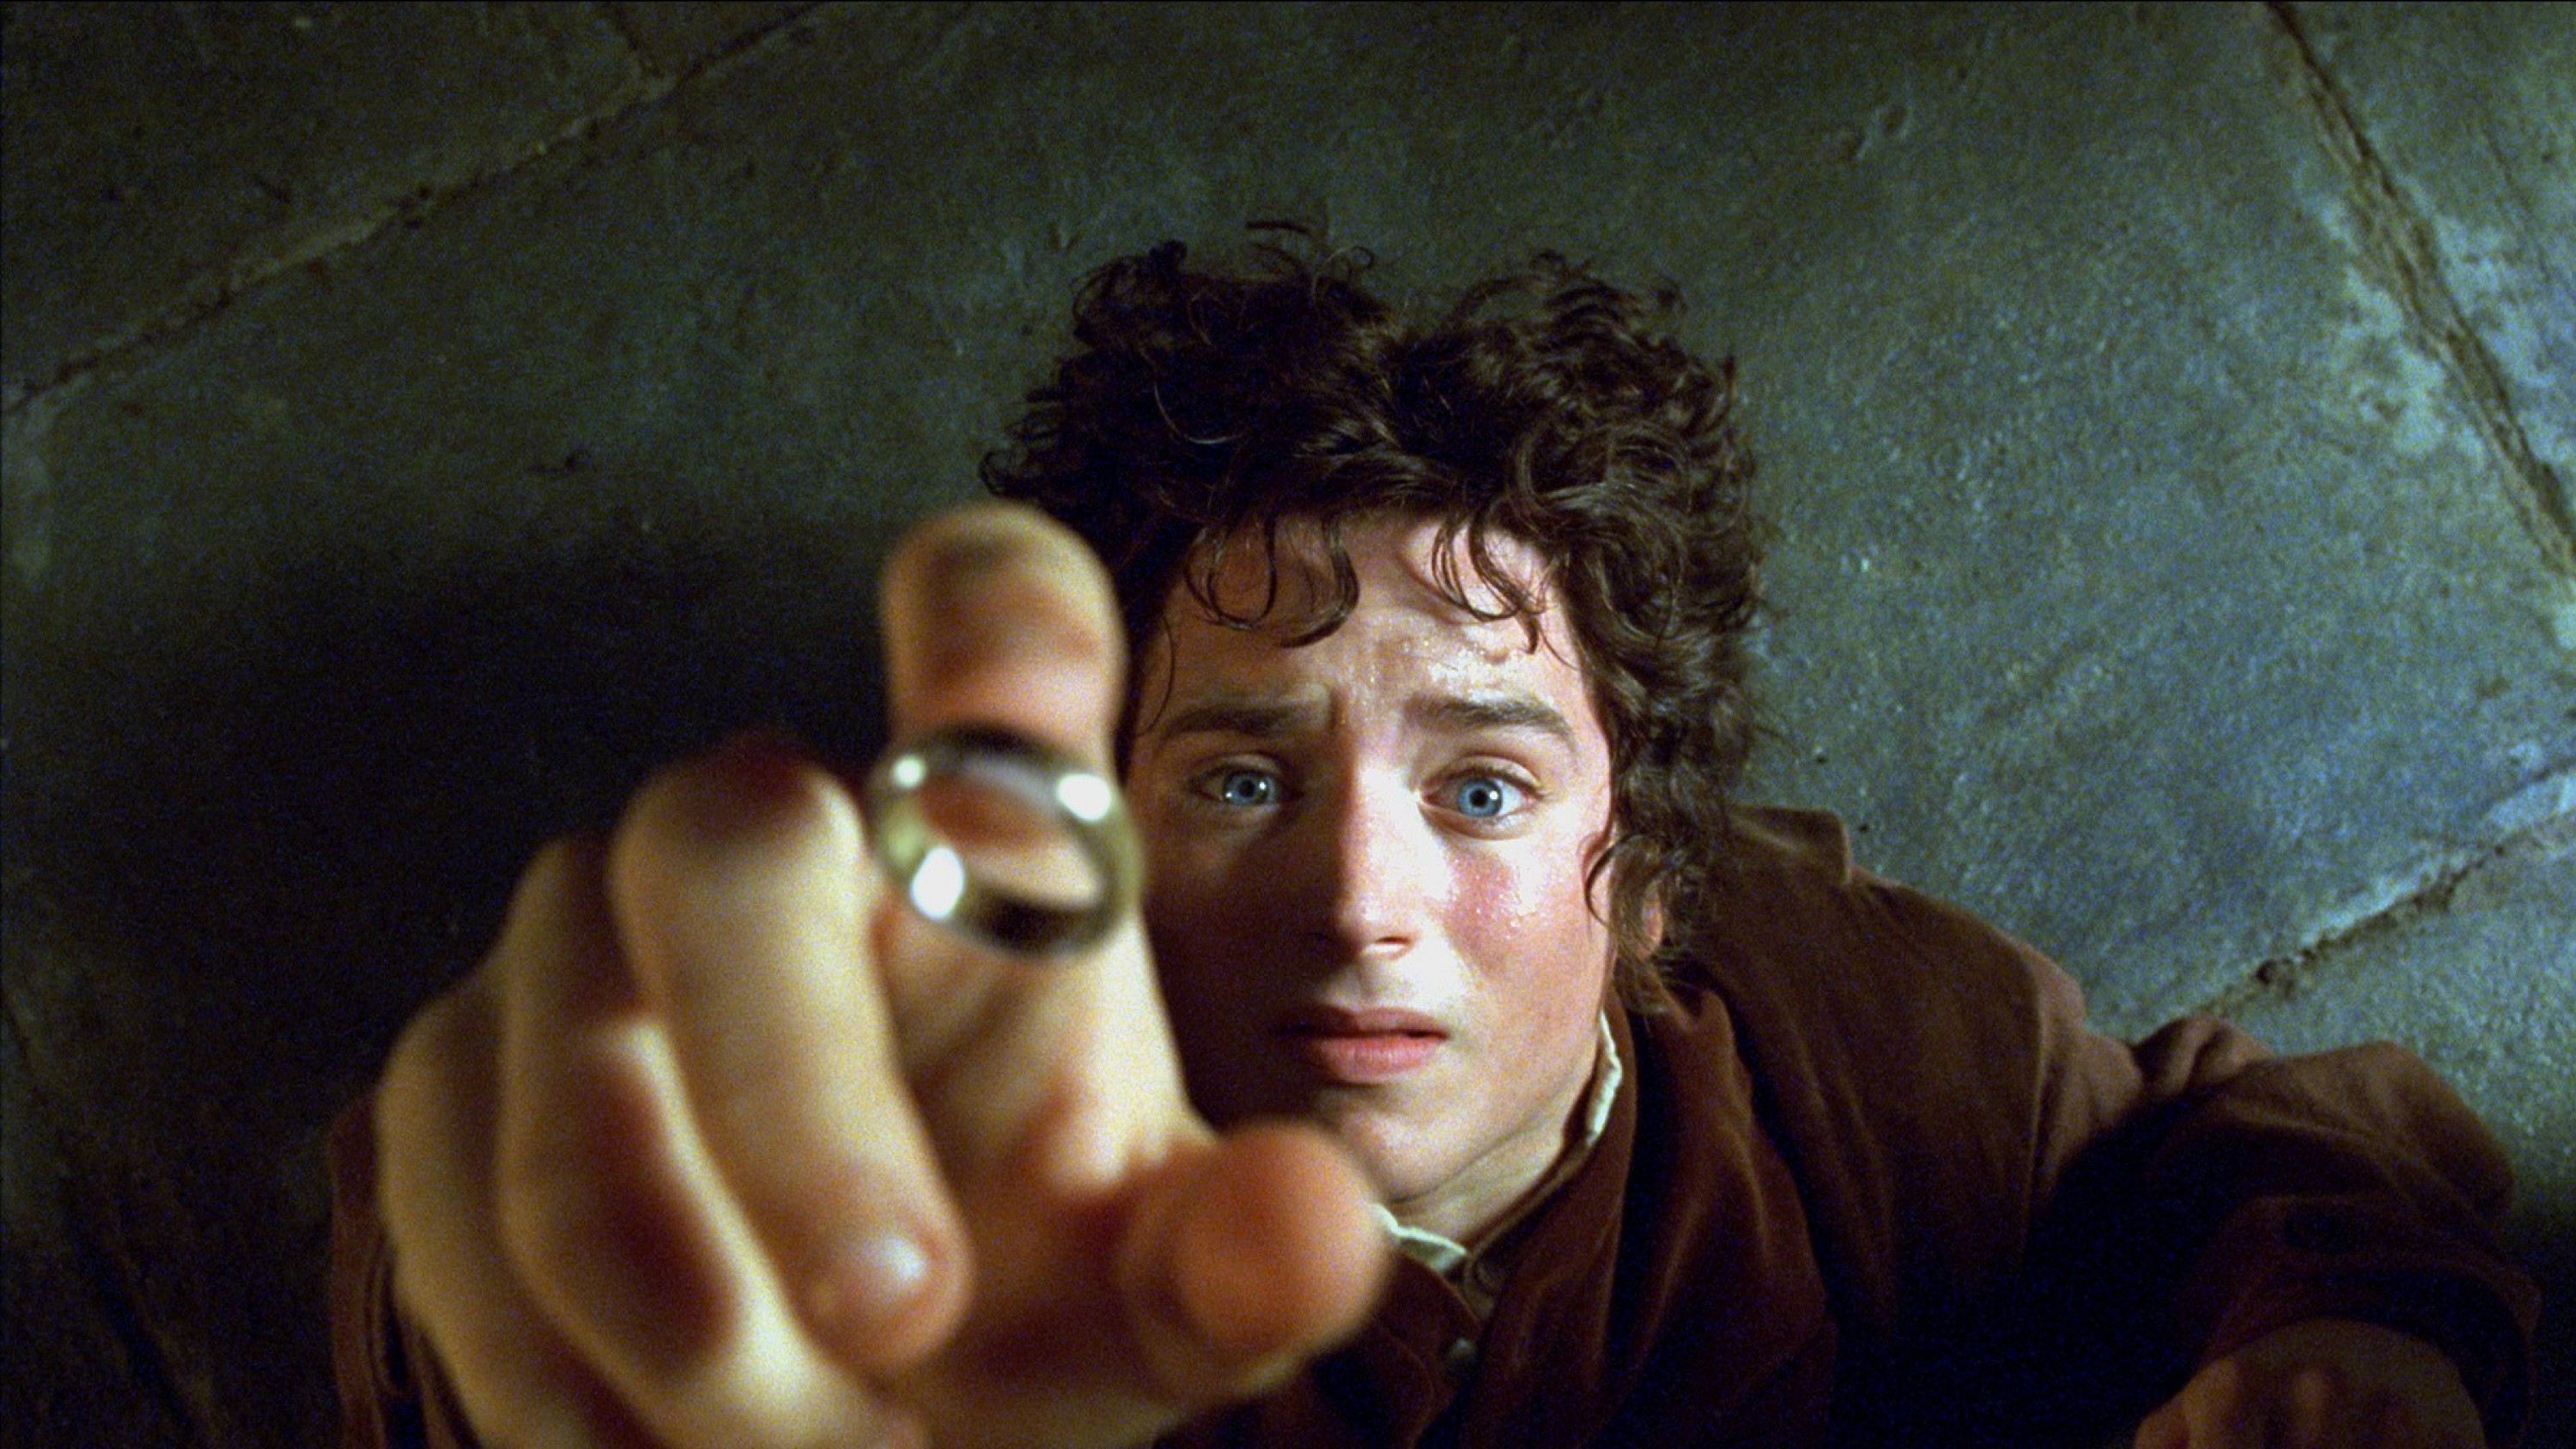 A film guide on Lord of the Rings: The Fellowship of the Ring (2001). thumb